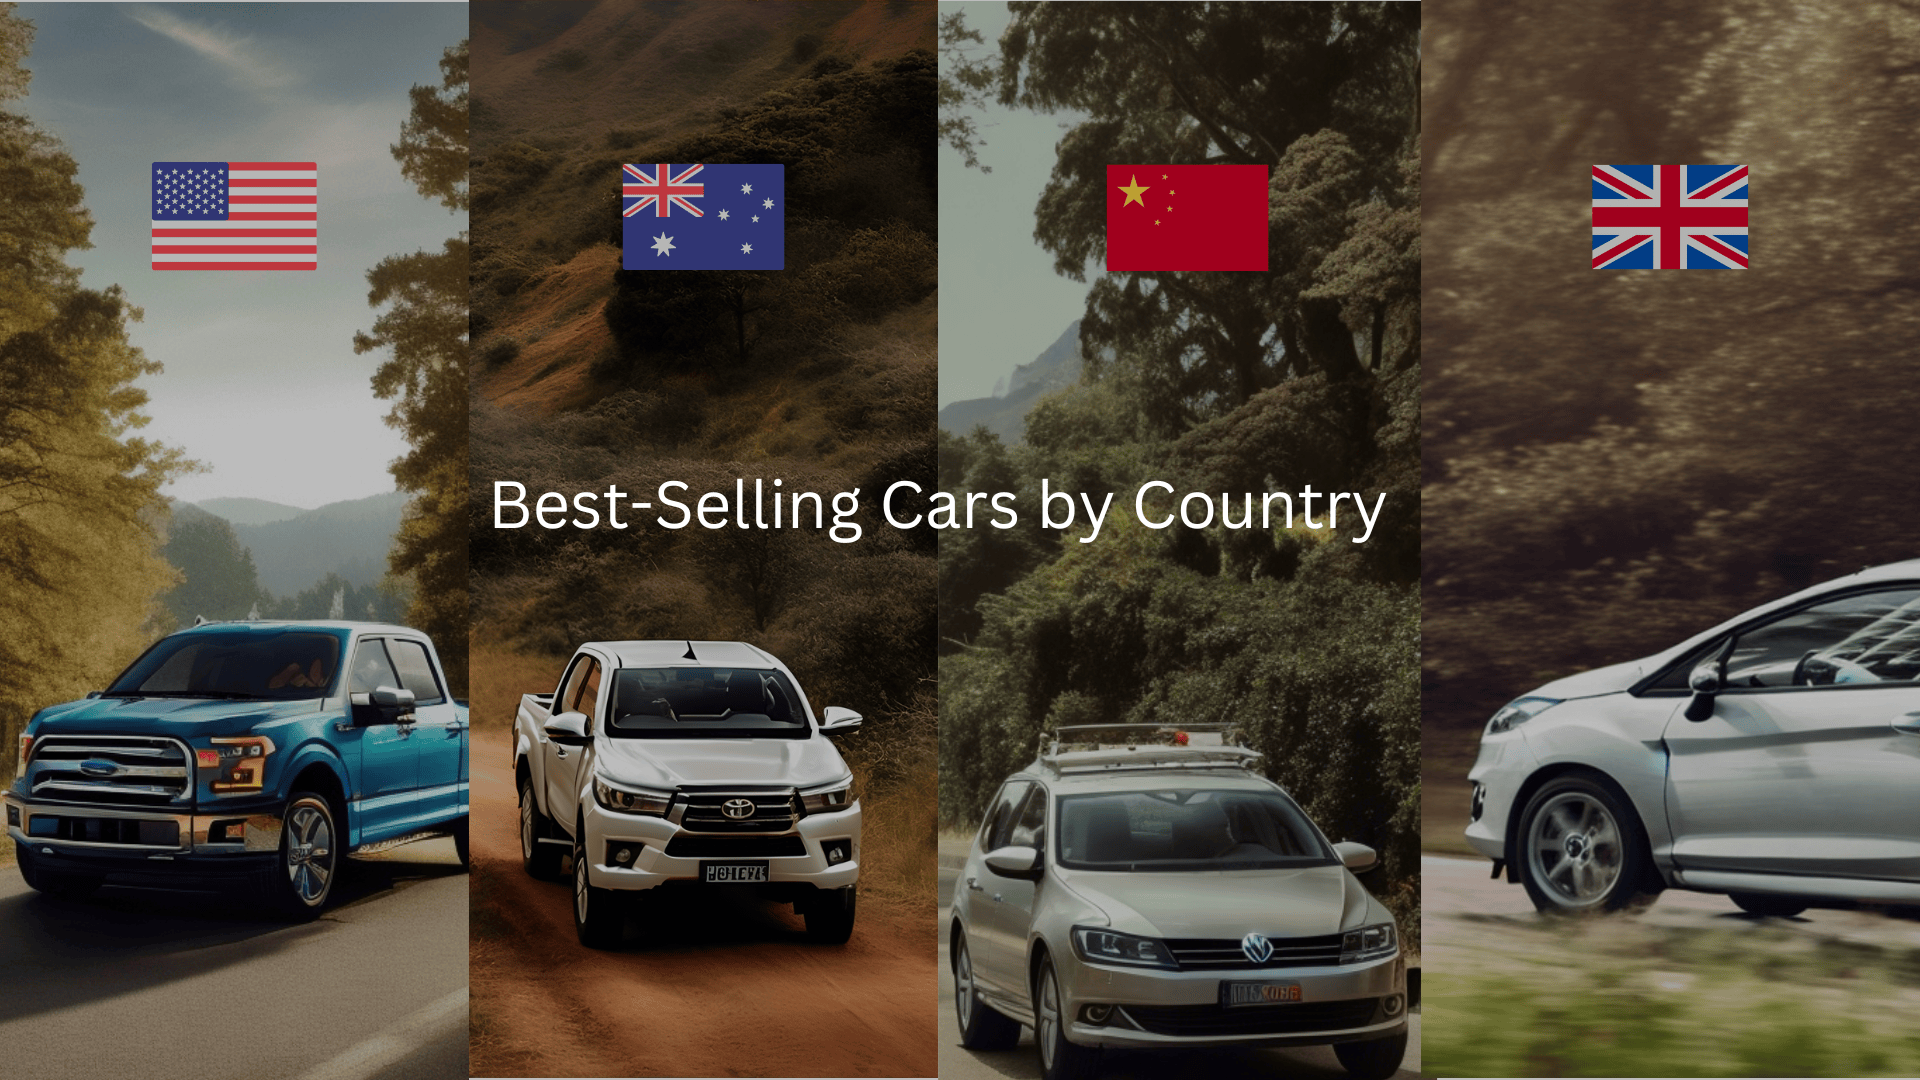 Best-Selling Cars by Country